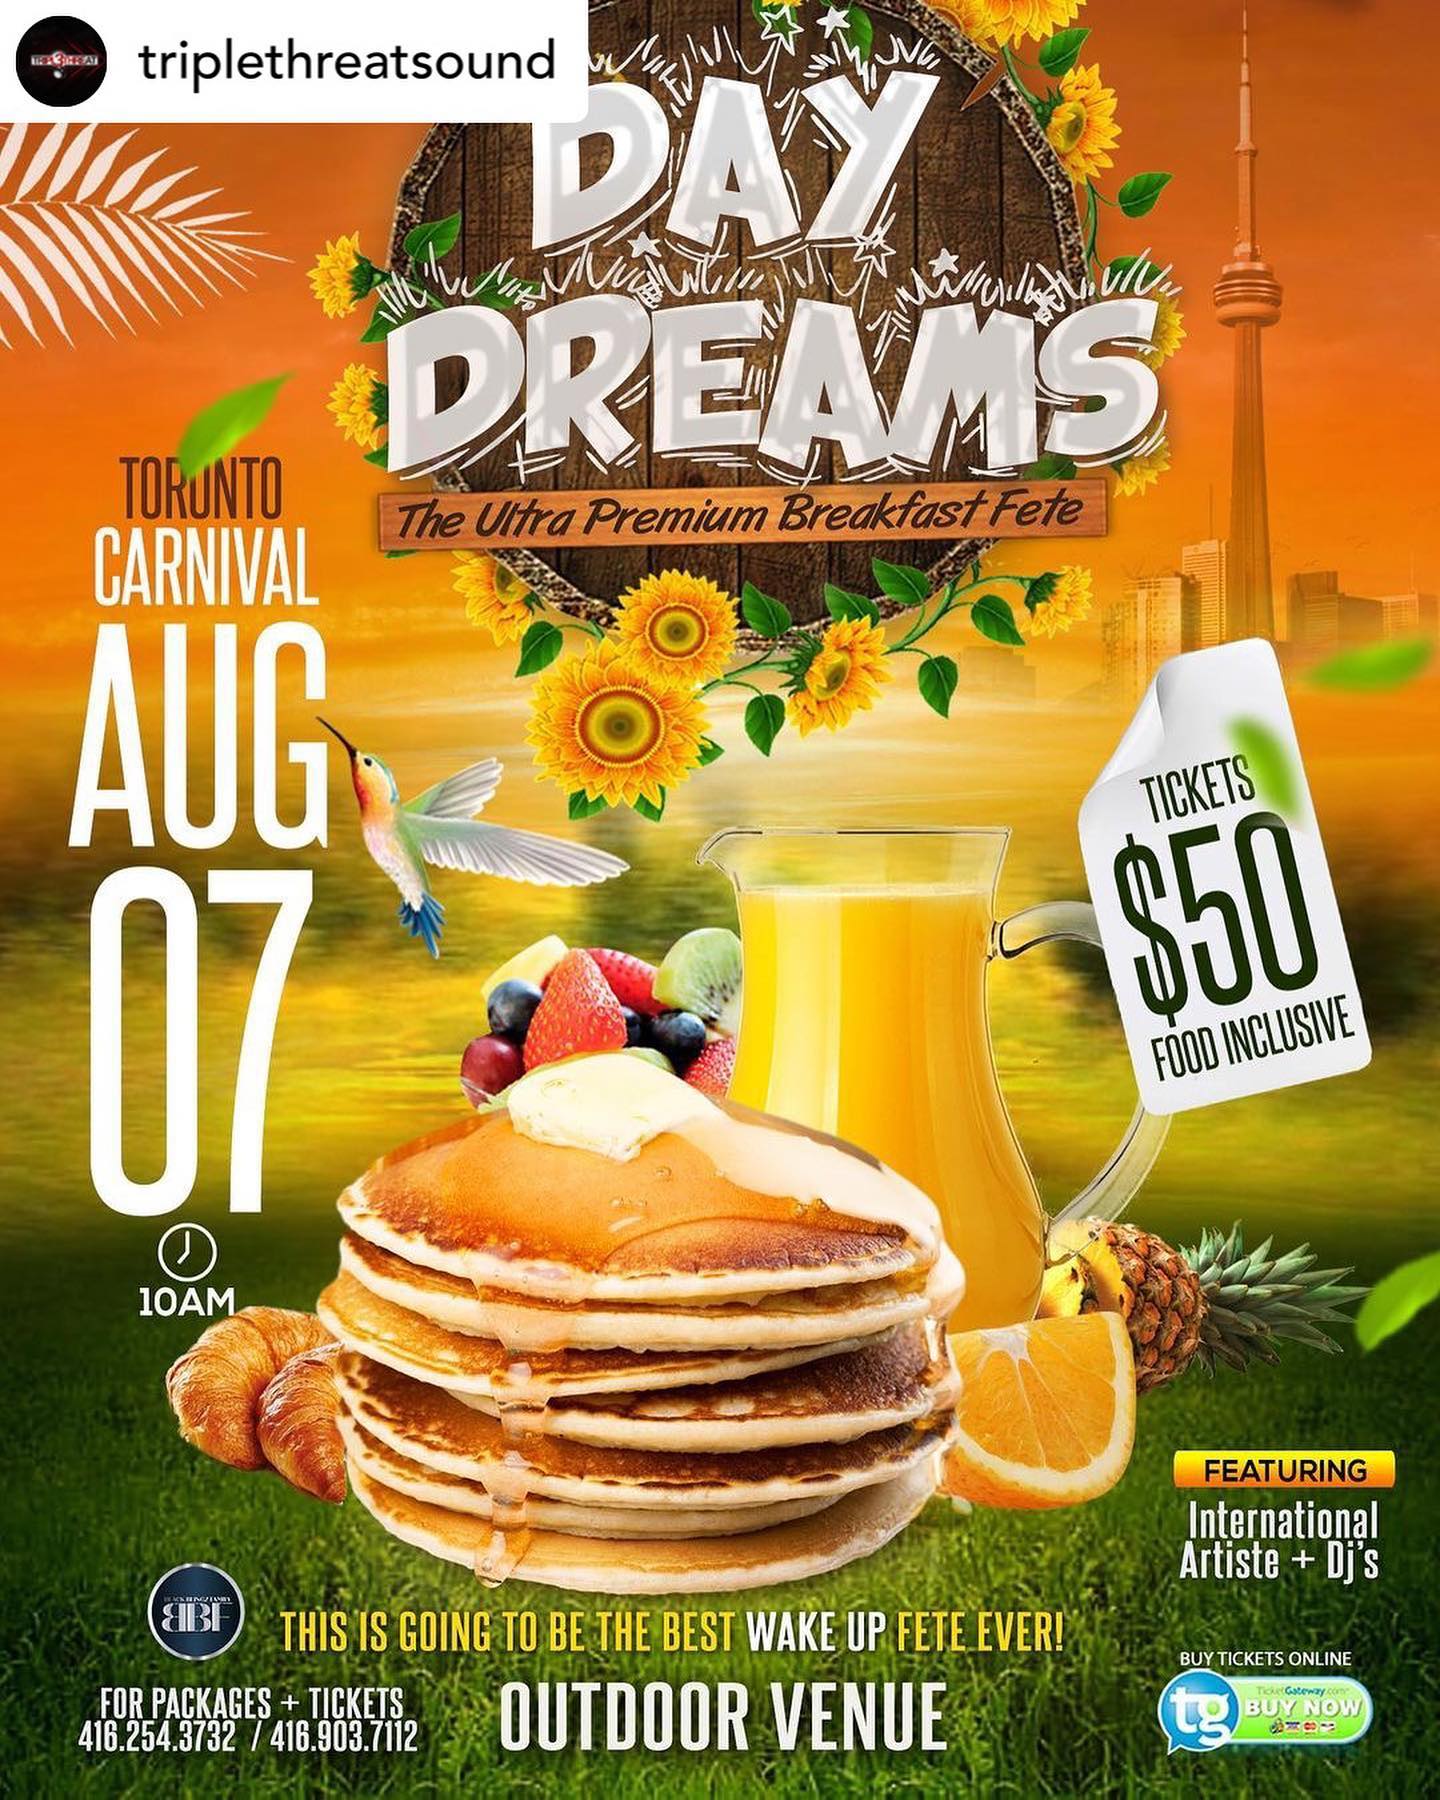 Wake up to breakfast with us Carnival Monday!

 🥞🌞DAY DREAMS🌞🥞
The Ultra Premium Breakfast Fete! 

  Toronto Carnival Long -Week End 
  Monday  Aug 7th 2023 

Time: 10am - until 

@Secure Outdoor Venue 
  Toronto - Canada 

Food • Hookah • Music • Mimosas • Vibes 

 Music / Live performance By 
International Artist + Djs 

Tables Reservation Highly Recommended 

(((( LIMITED CAPACITY EVENT )))

For tickets online ️️️
https://www.ticketgateway.com/day-dream---the-ultra-caribana-breakfast-fete
•••••••••••••••••••••••••••••••••••••
For tickets or reservations Contact  @triplethreatsound 416.254.3732 

#torontofoodblogger🏿🏿